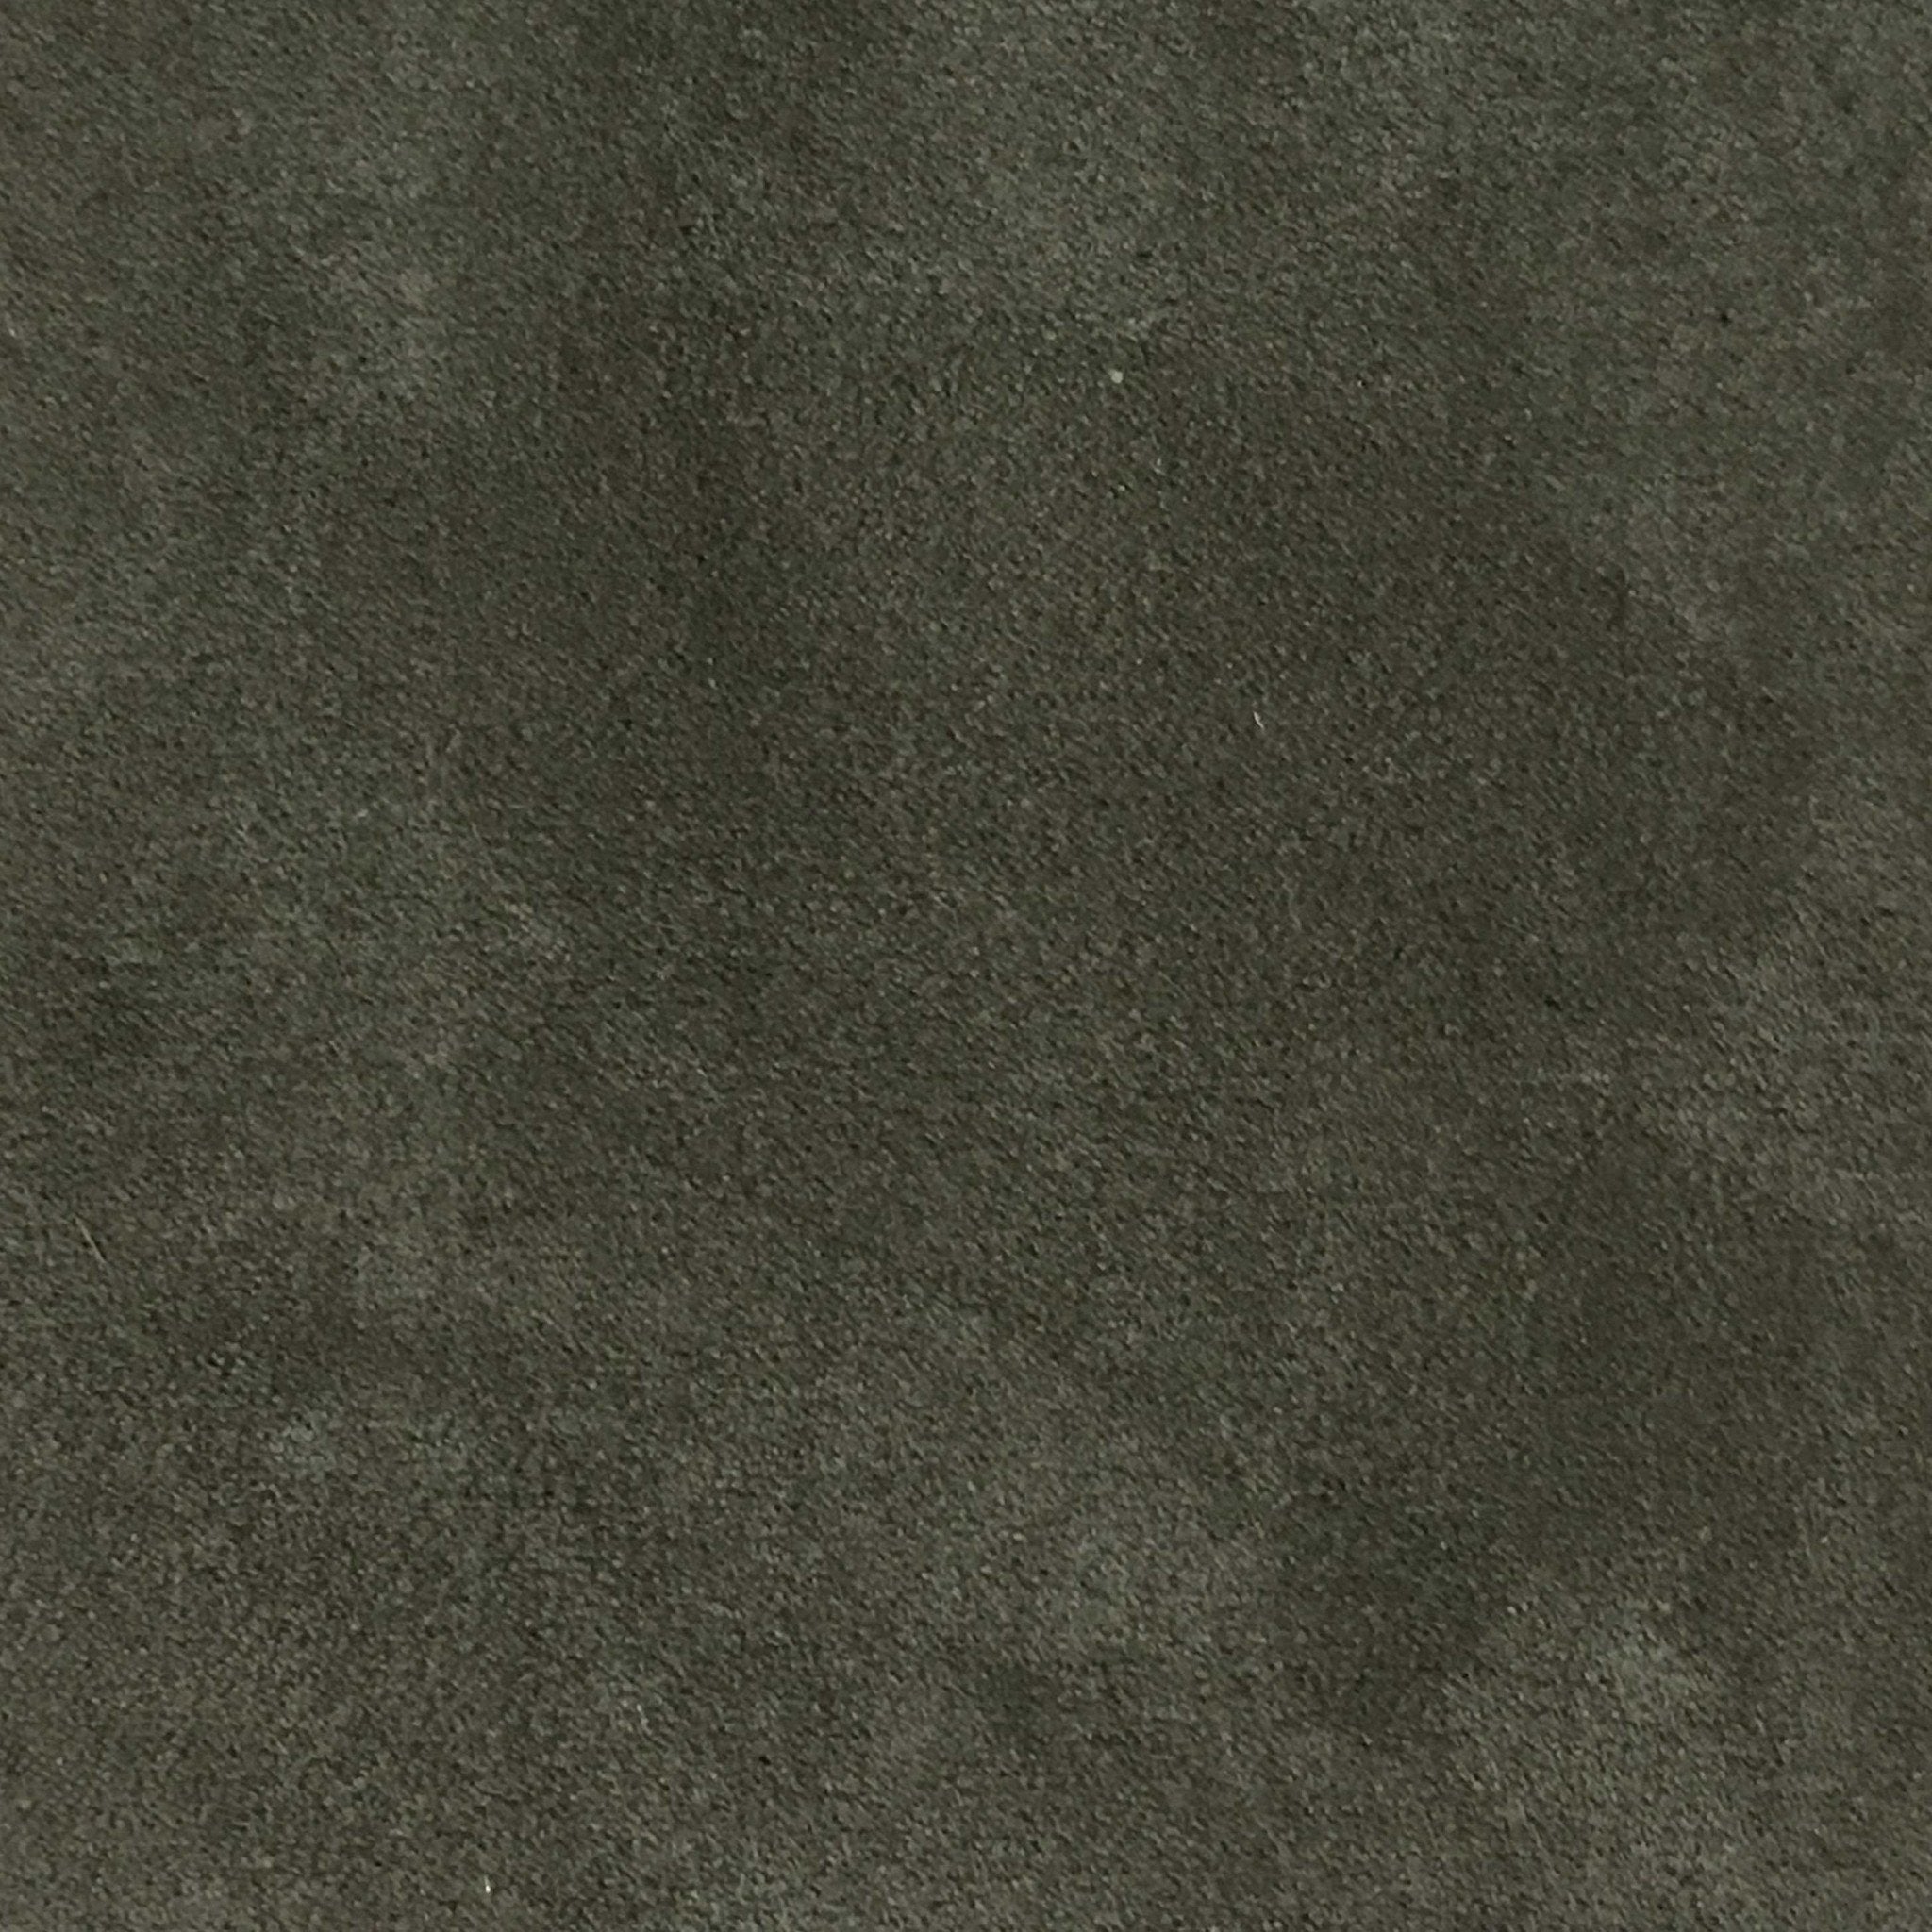 Gray Suede Fabric by the Yard Gray Microsuede Faux Suede Apparel